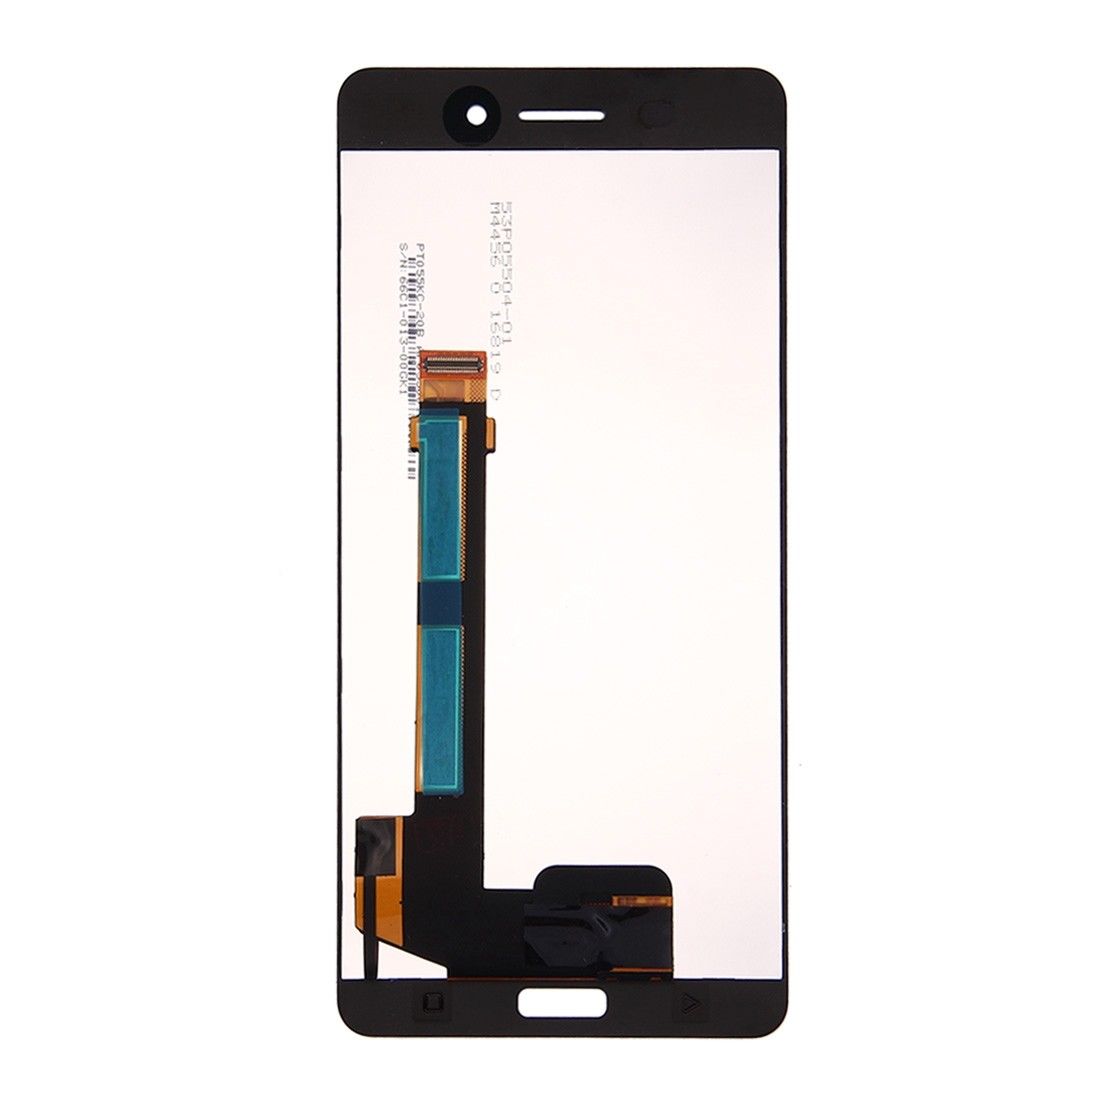 Nokia 6 2017 Replacement LCD Touch Screen Assembly - Black for [product_price] - First Help Tech